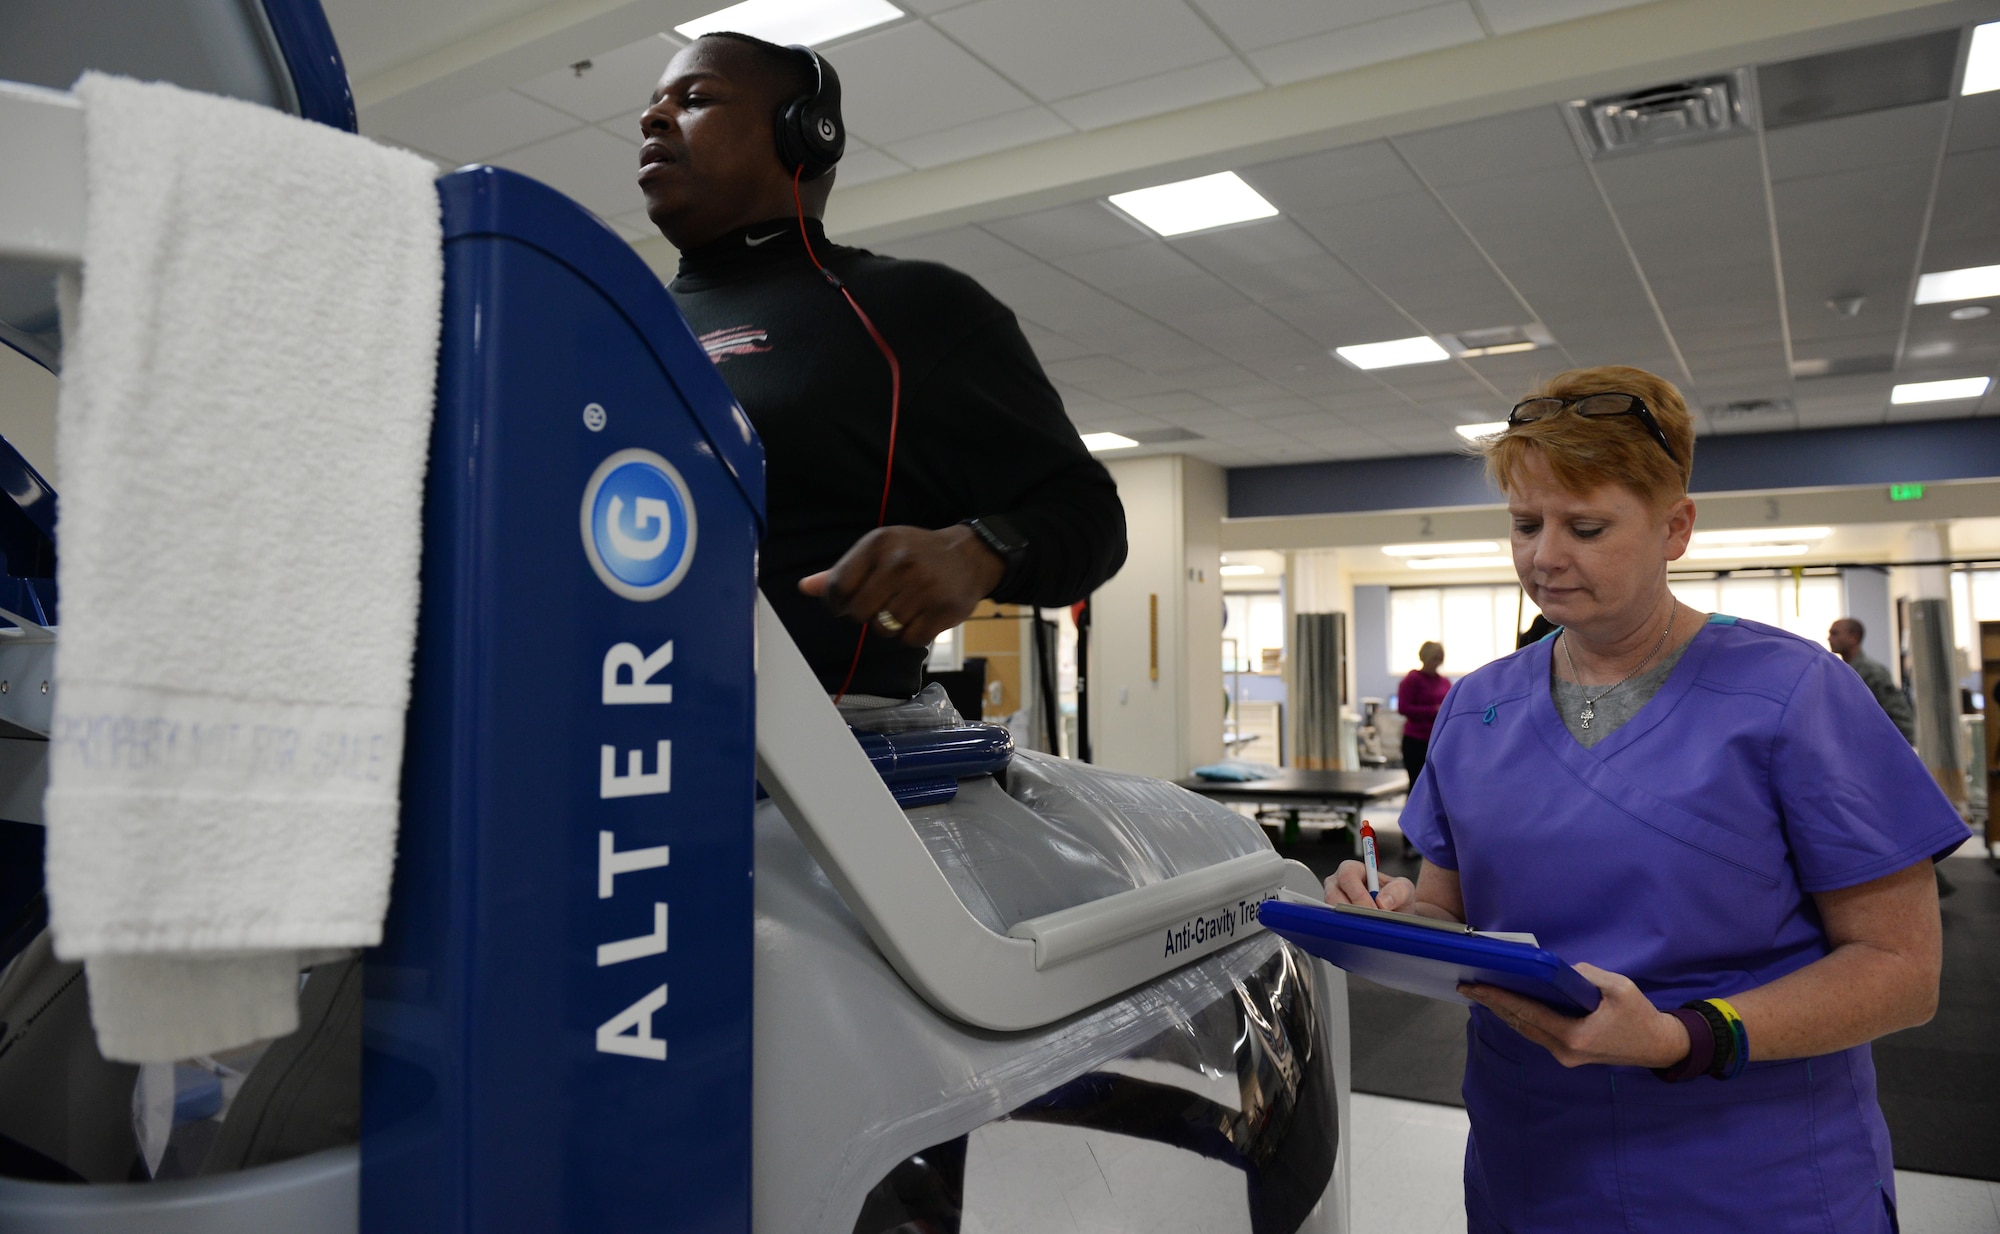 Sharay Windham, 81st Medical Support Squadron licensed physical therapist assistant, takes notes as Master Sgt. Byron Self, 81st Security Forces Squadron flight chief, runs on an anti-gravity treadmill in the Physical Therapy department, April 6, 2016, Keesler Air Force Base, Miss. The anti-gravity treadmill is used to help rehabilitate clients who have injuries to their lower limbs by decreasing the amount of weight on the client’s joints which helps with recovery after injury or surgery. (Air Force Photo by Airman 1st Class Travis Beihl)